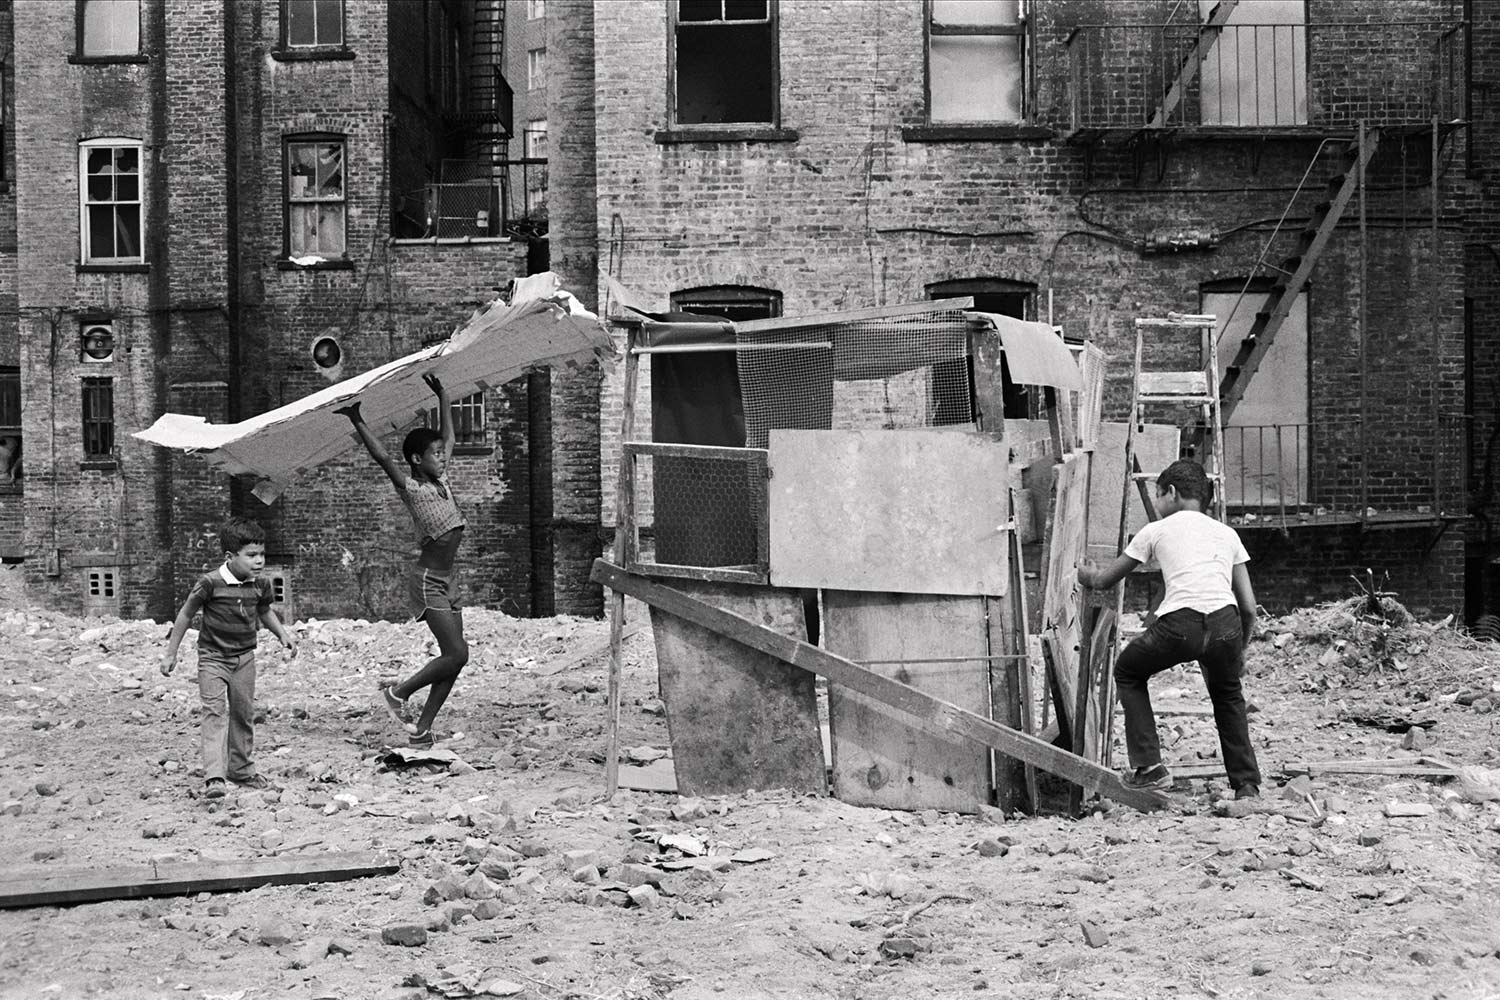 Lower East Side, New York City, 1978. Kids playing in the street